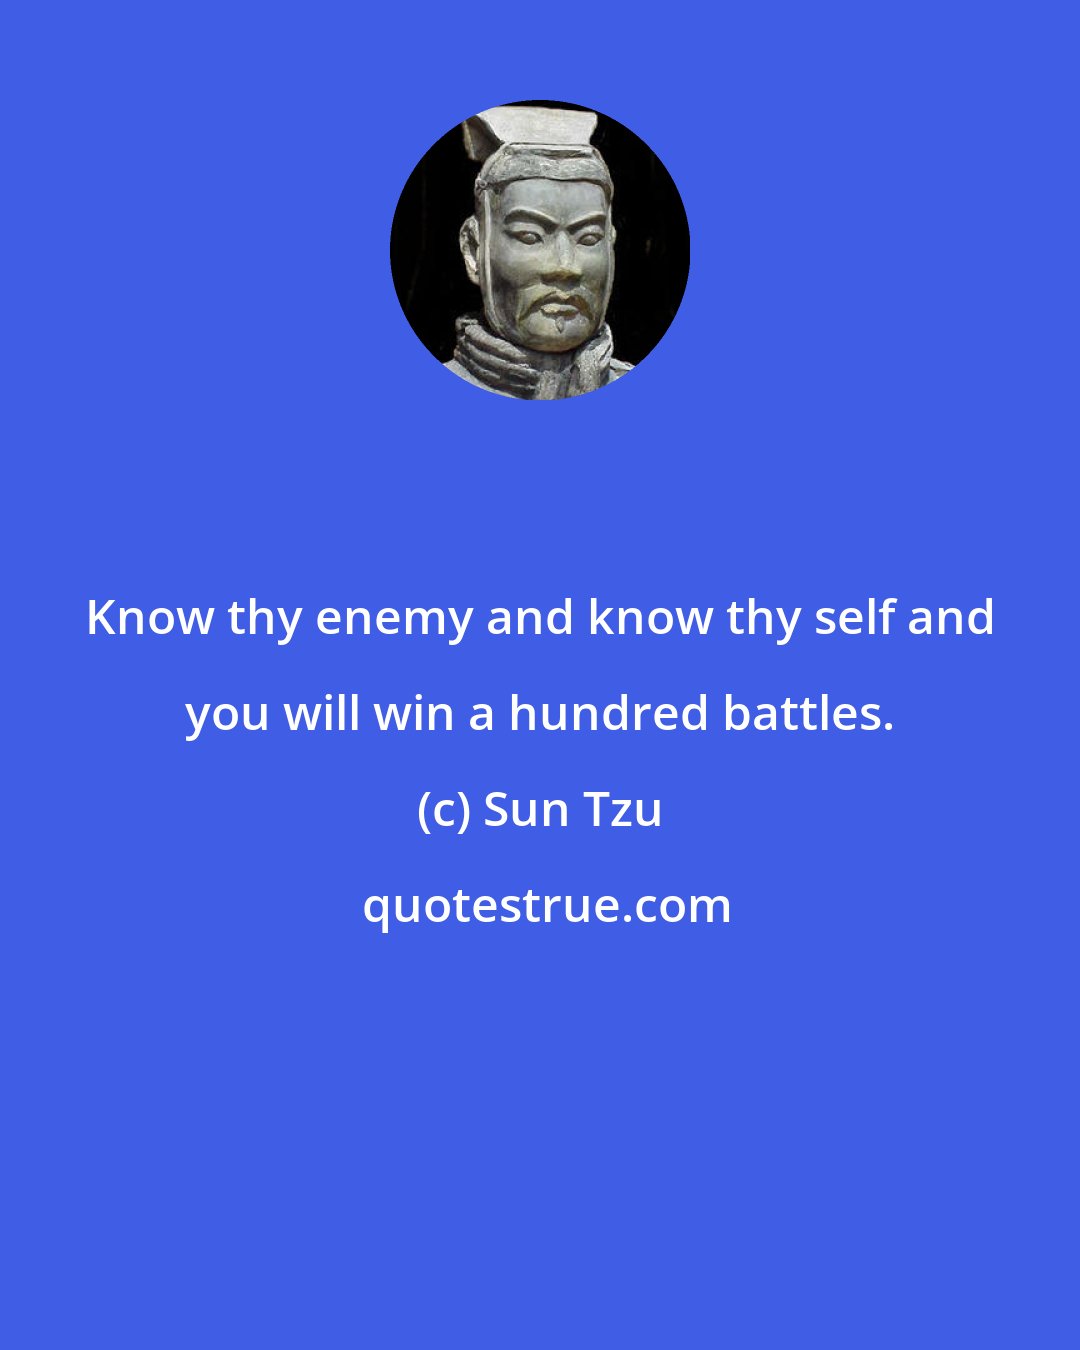 Sun Tzu: Know thy enemy and know thy self and you will win a hundred battles.